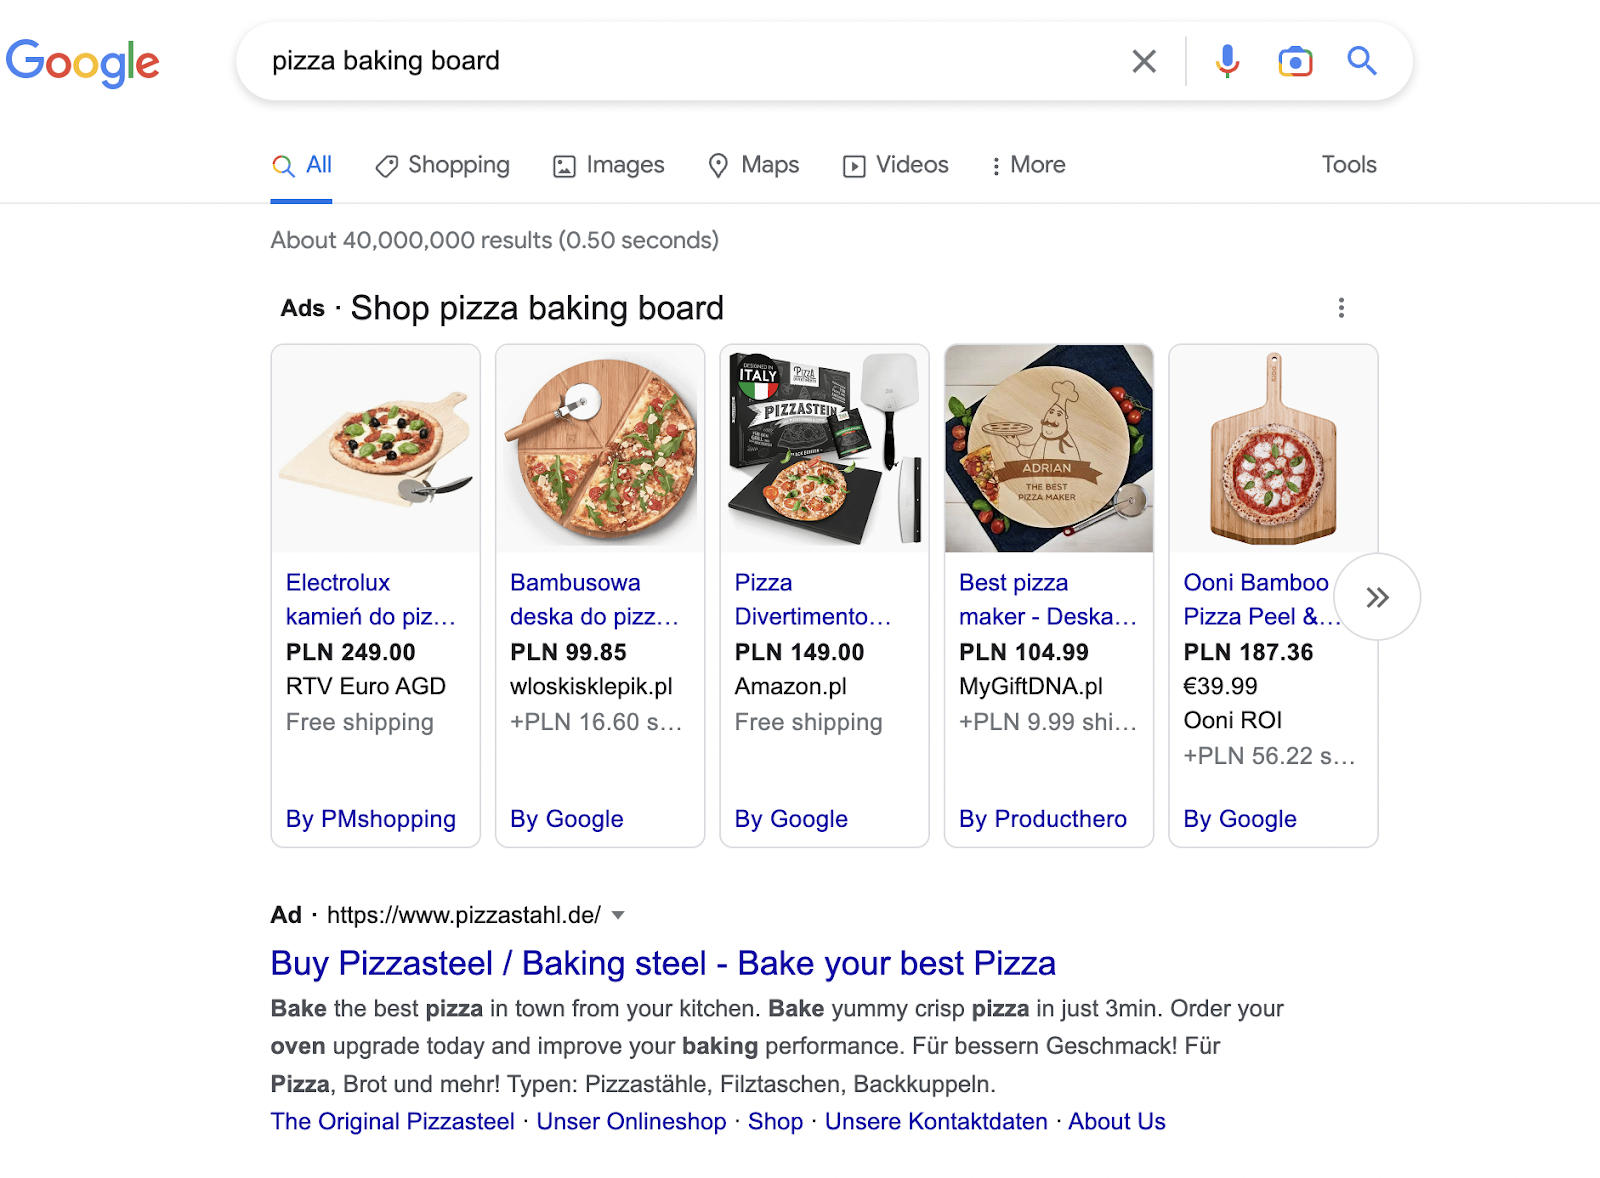 Transactional search intent example